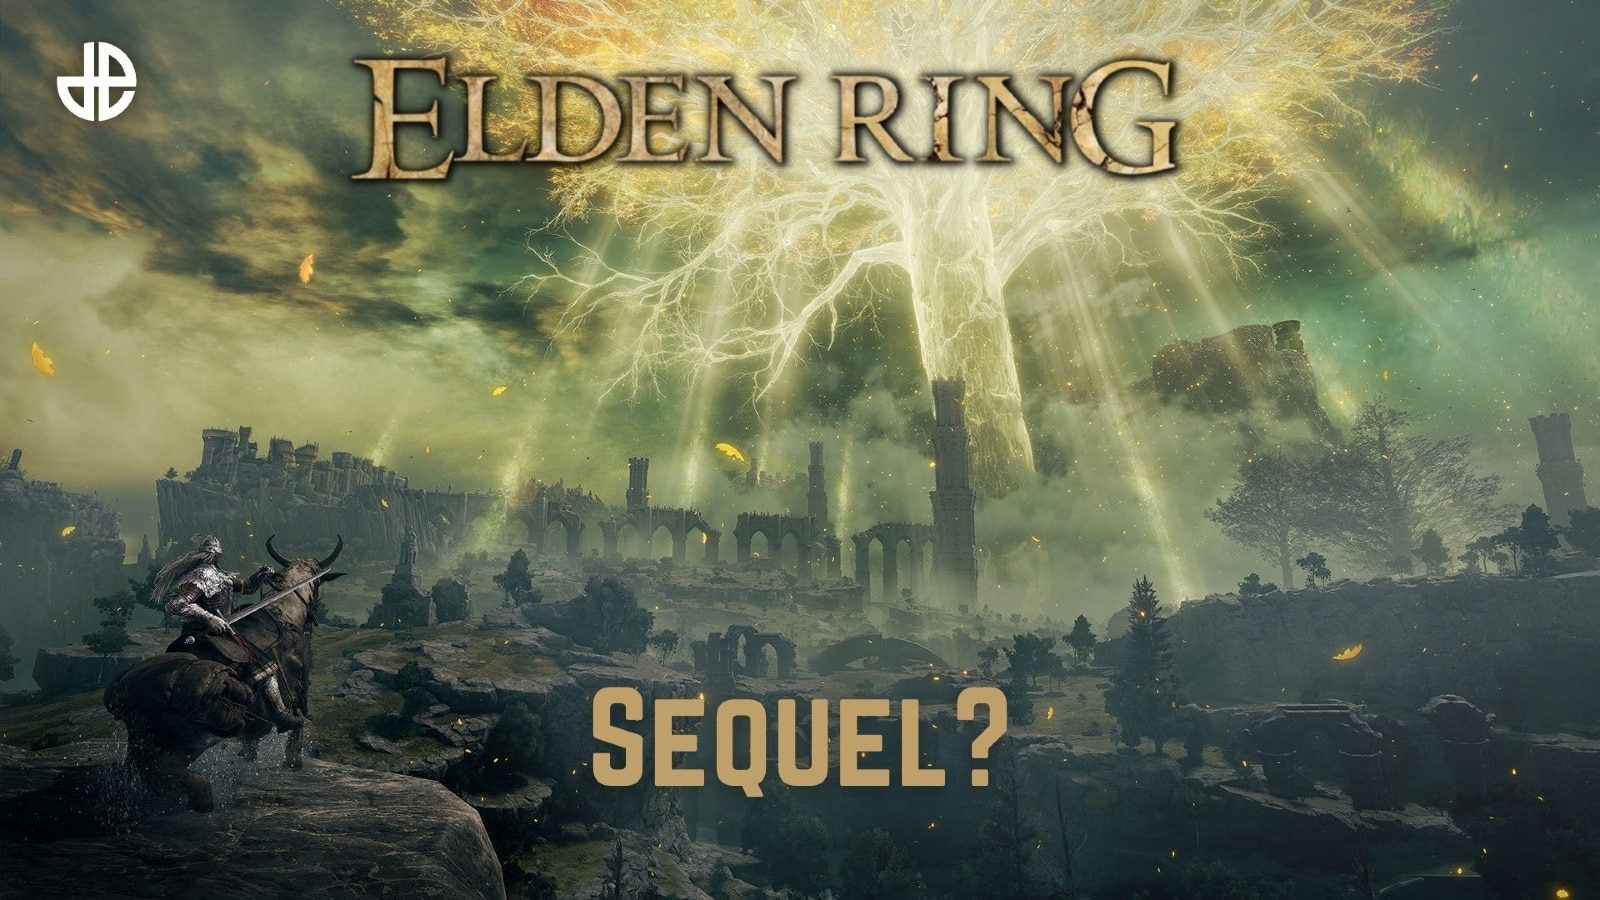 Is Elden Ring a sequel to the Dark Souls series?